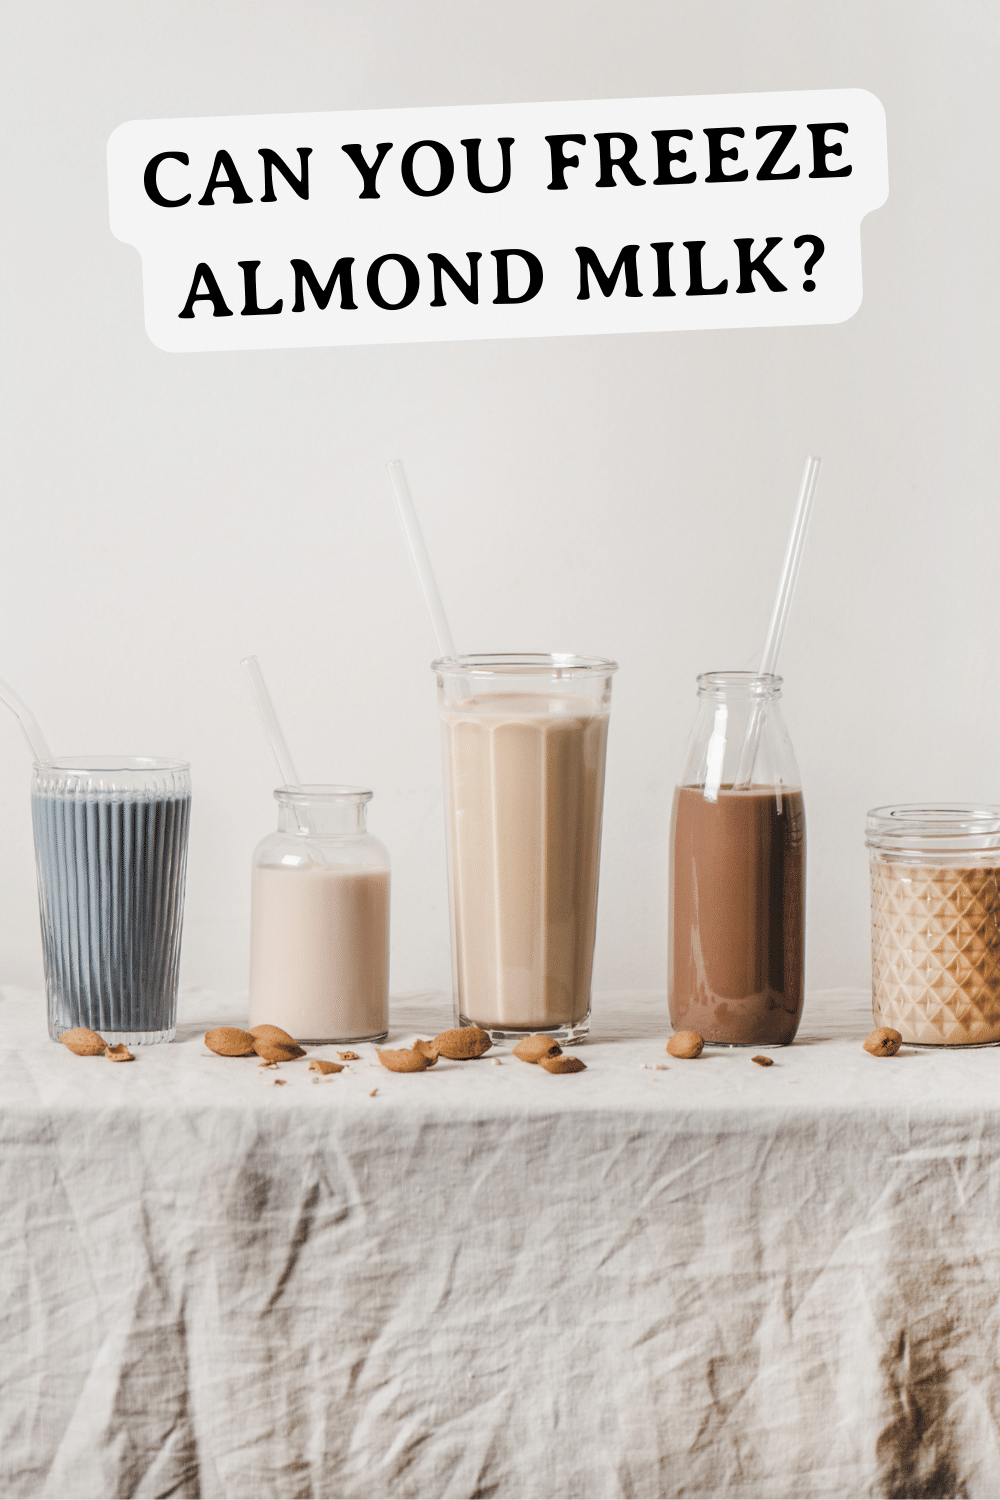 Can you freeze almond milk?